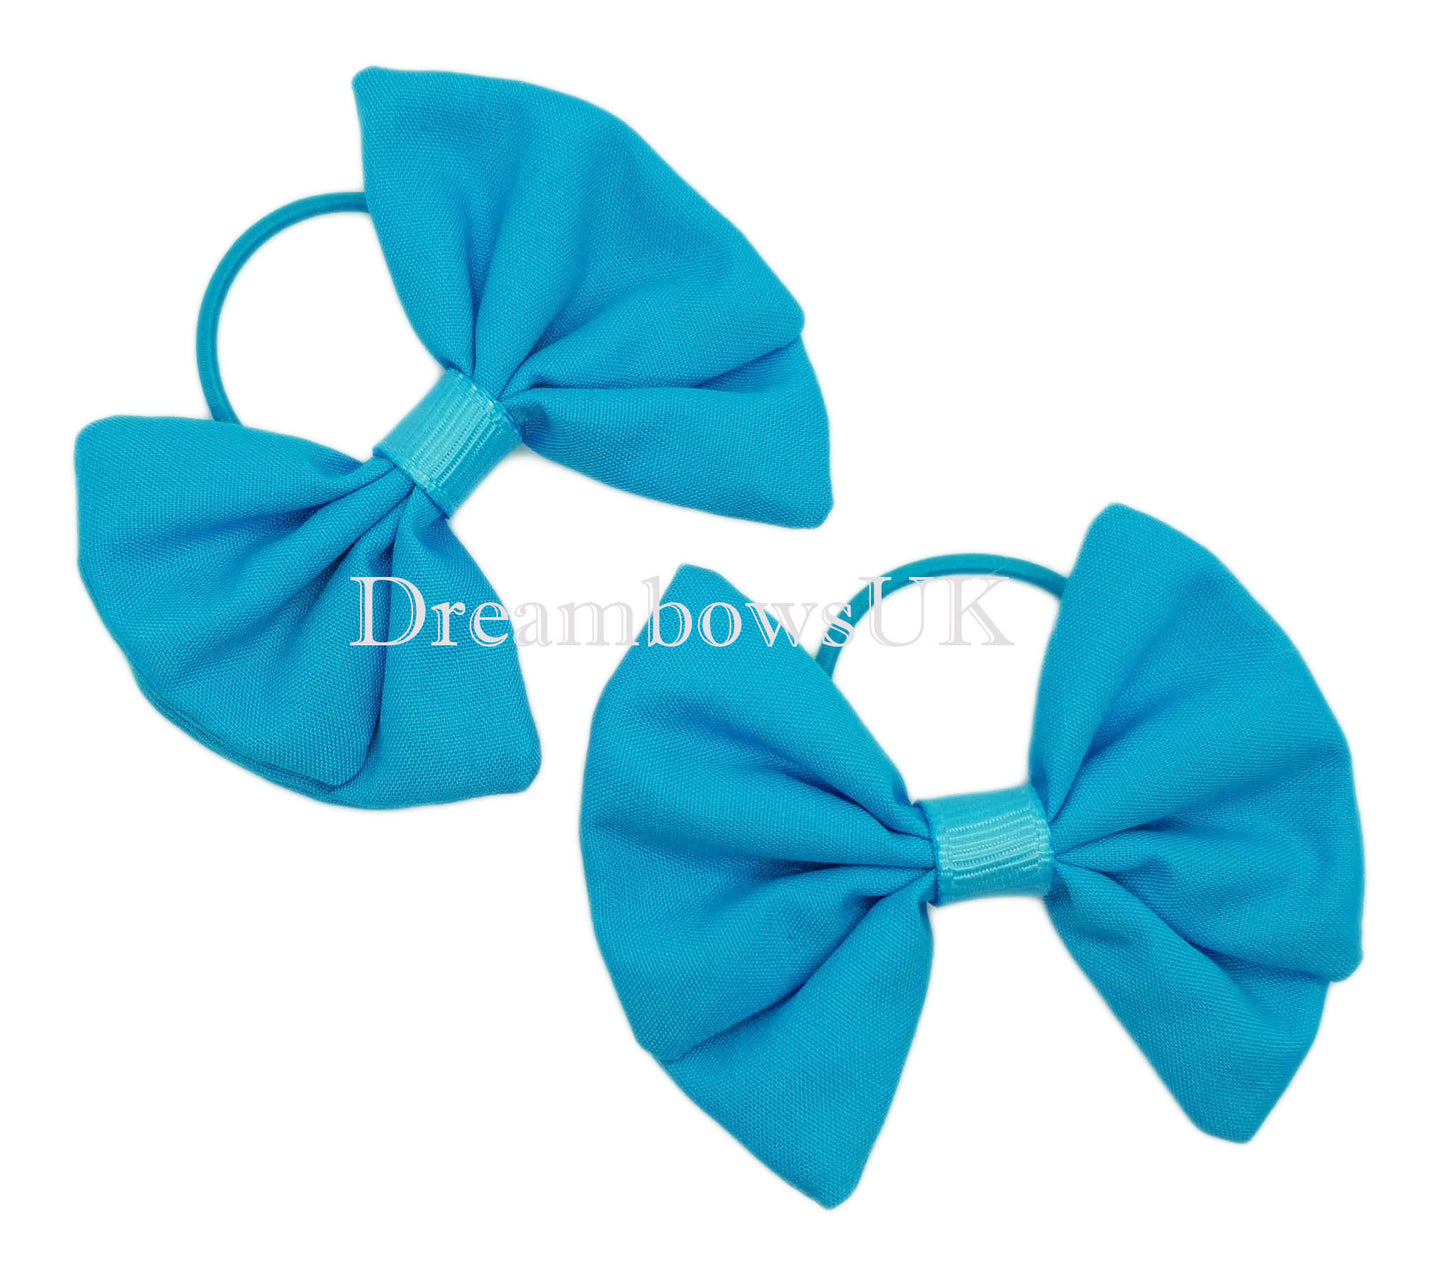 Girls turquoise fabric hair bows on thin bobbles